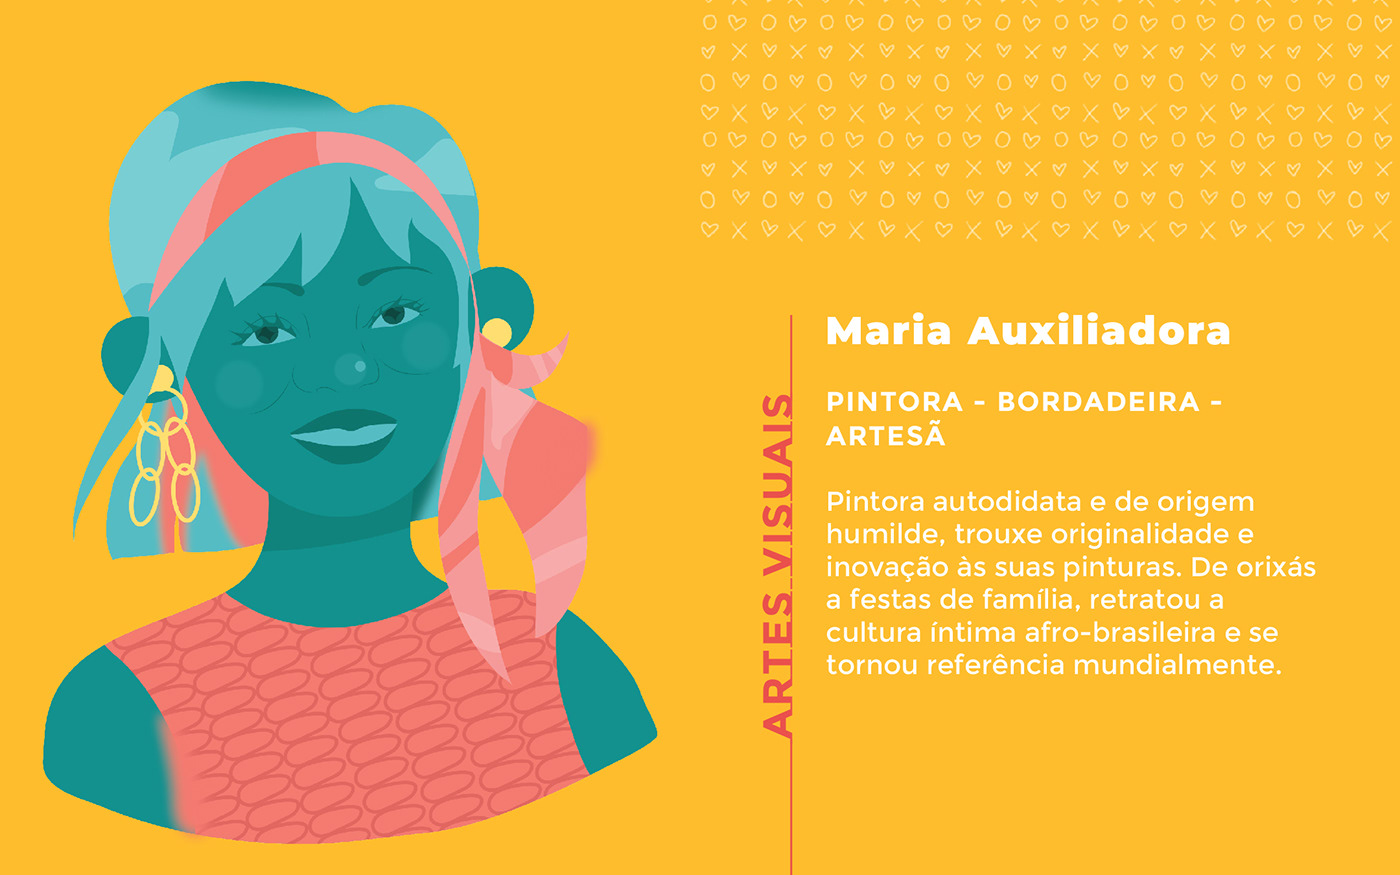 An illustrated portrait of Maria Auxiliadora, a brazilian painter and artisan.
